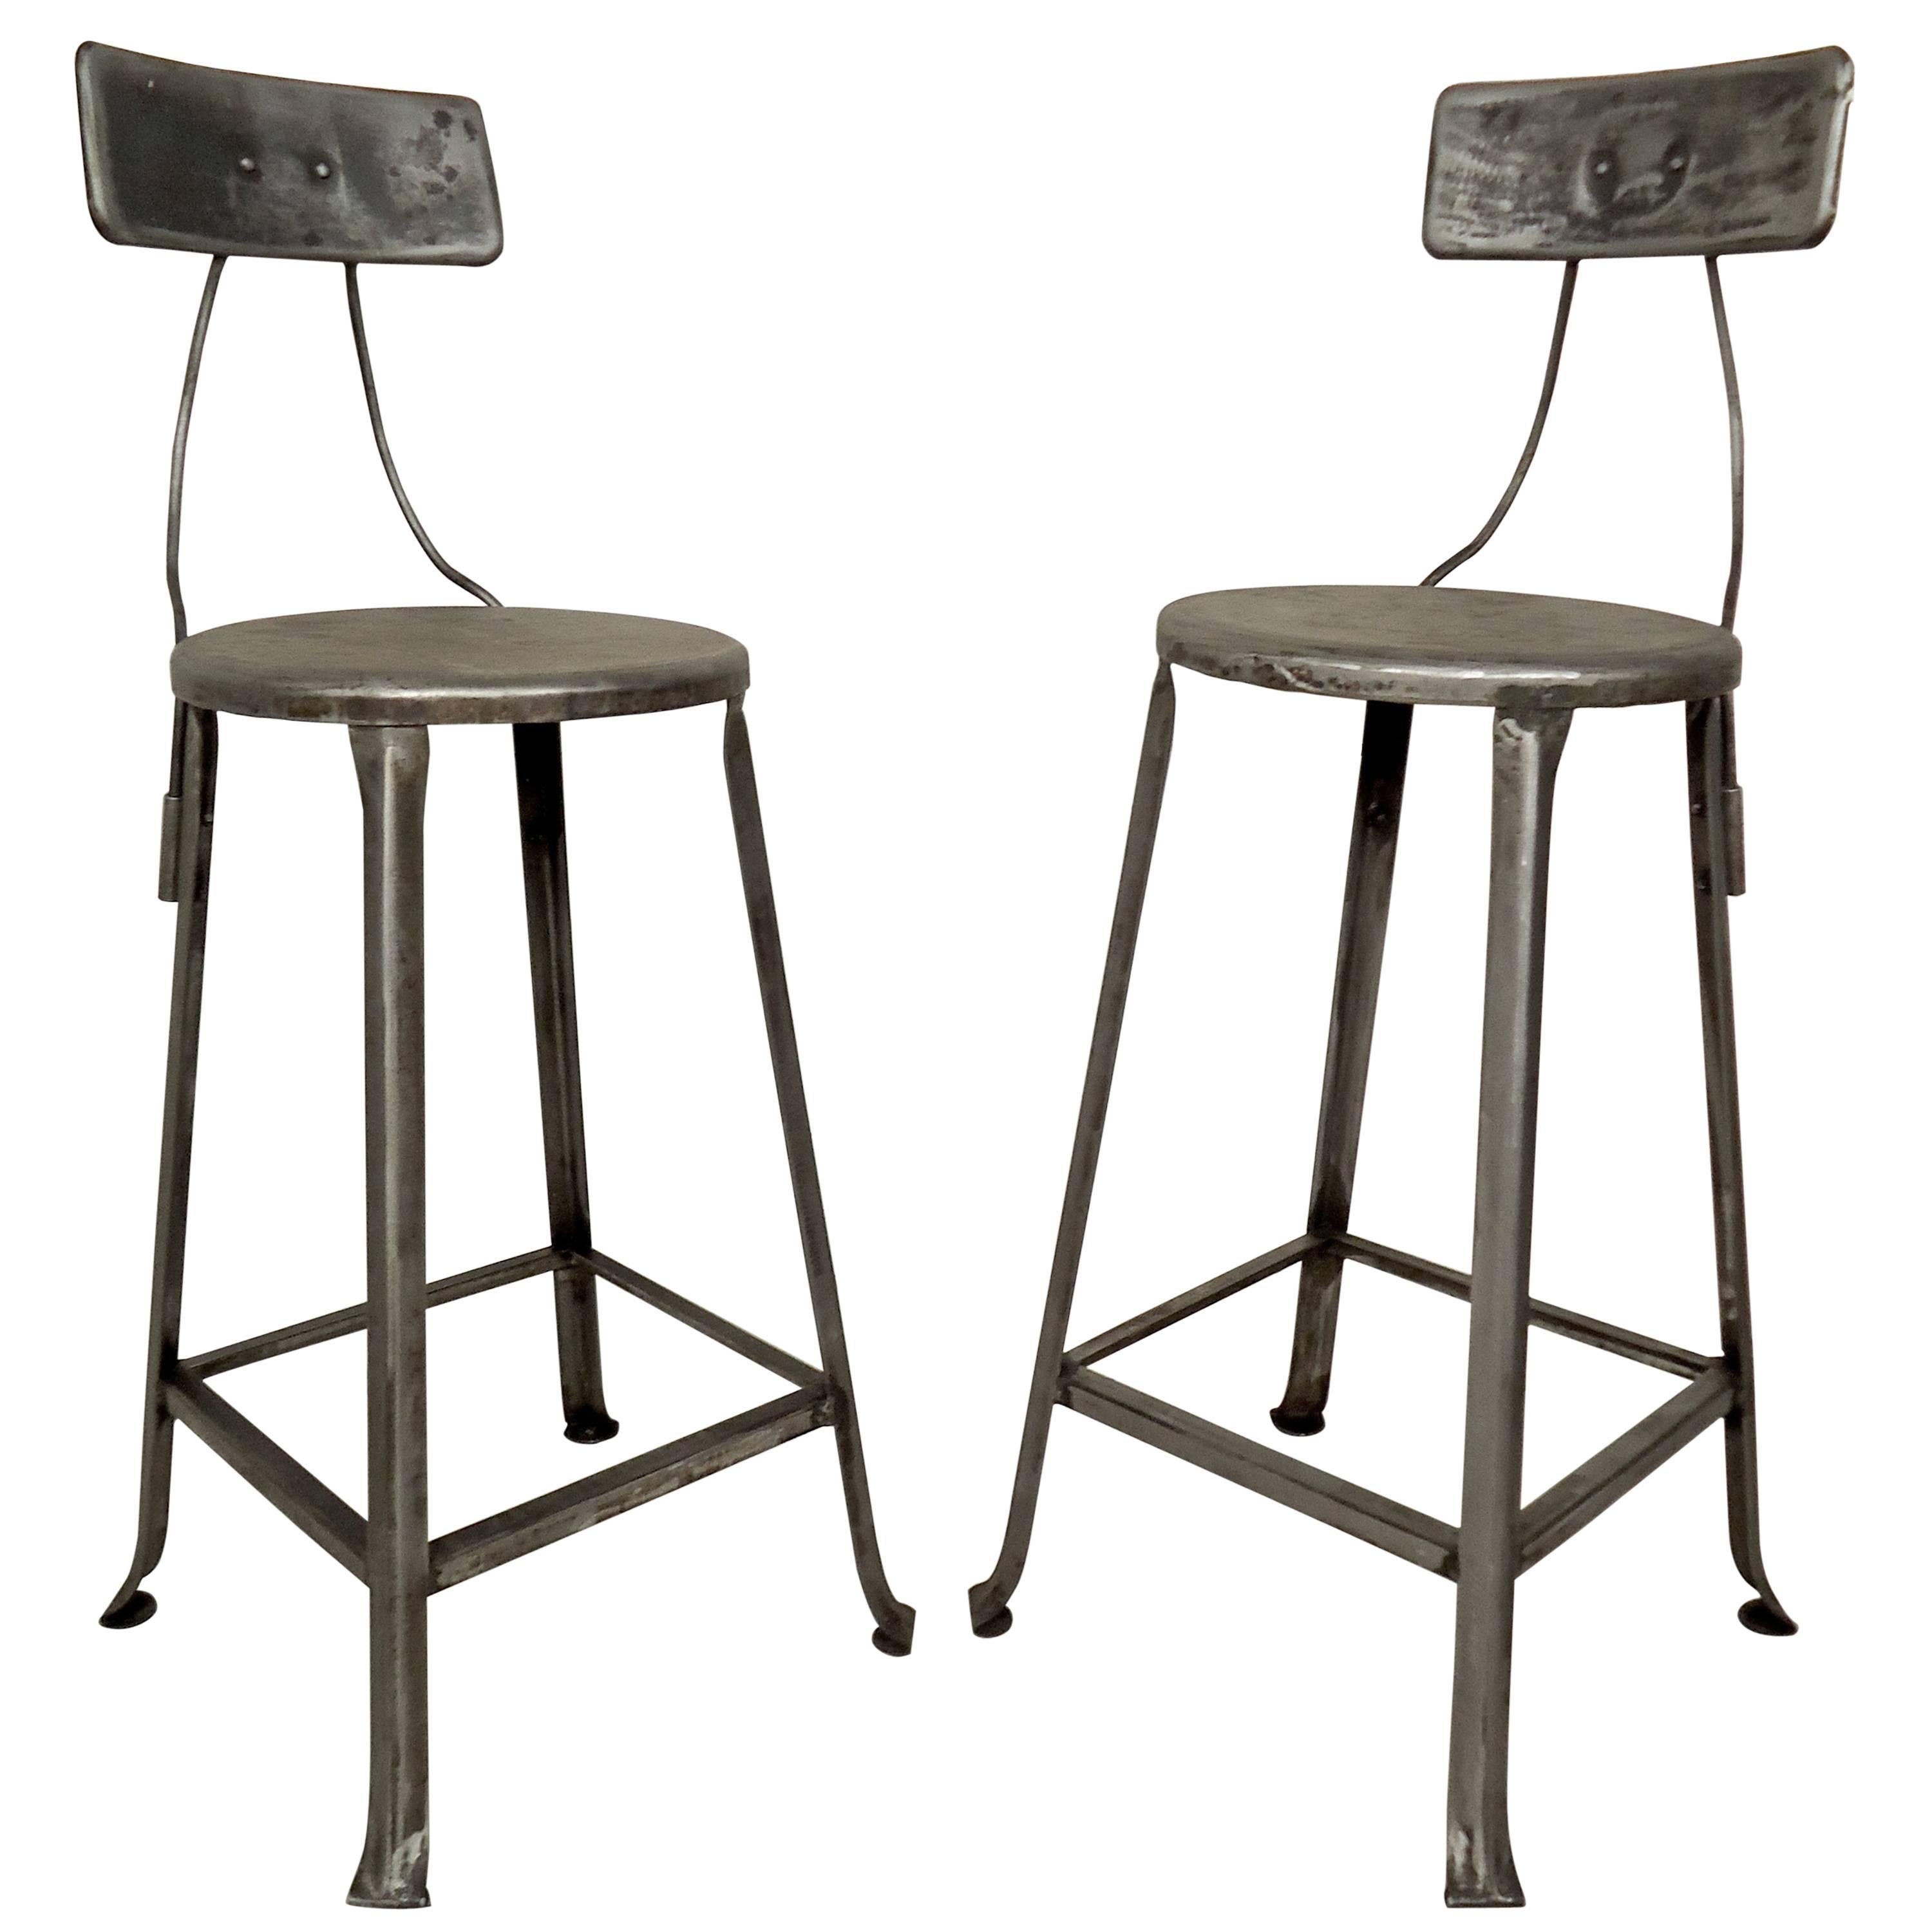 Pair of Toledo Style Industrial Factory Stools